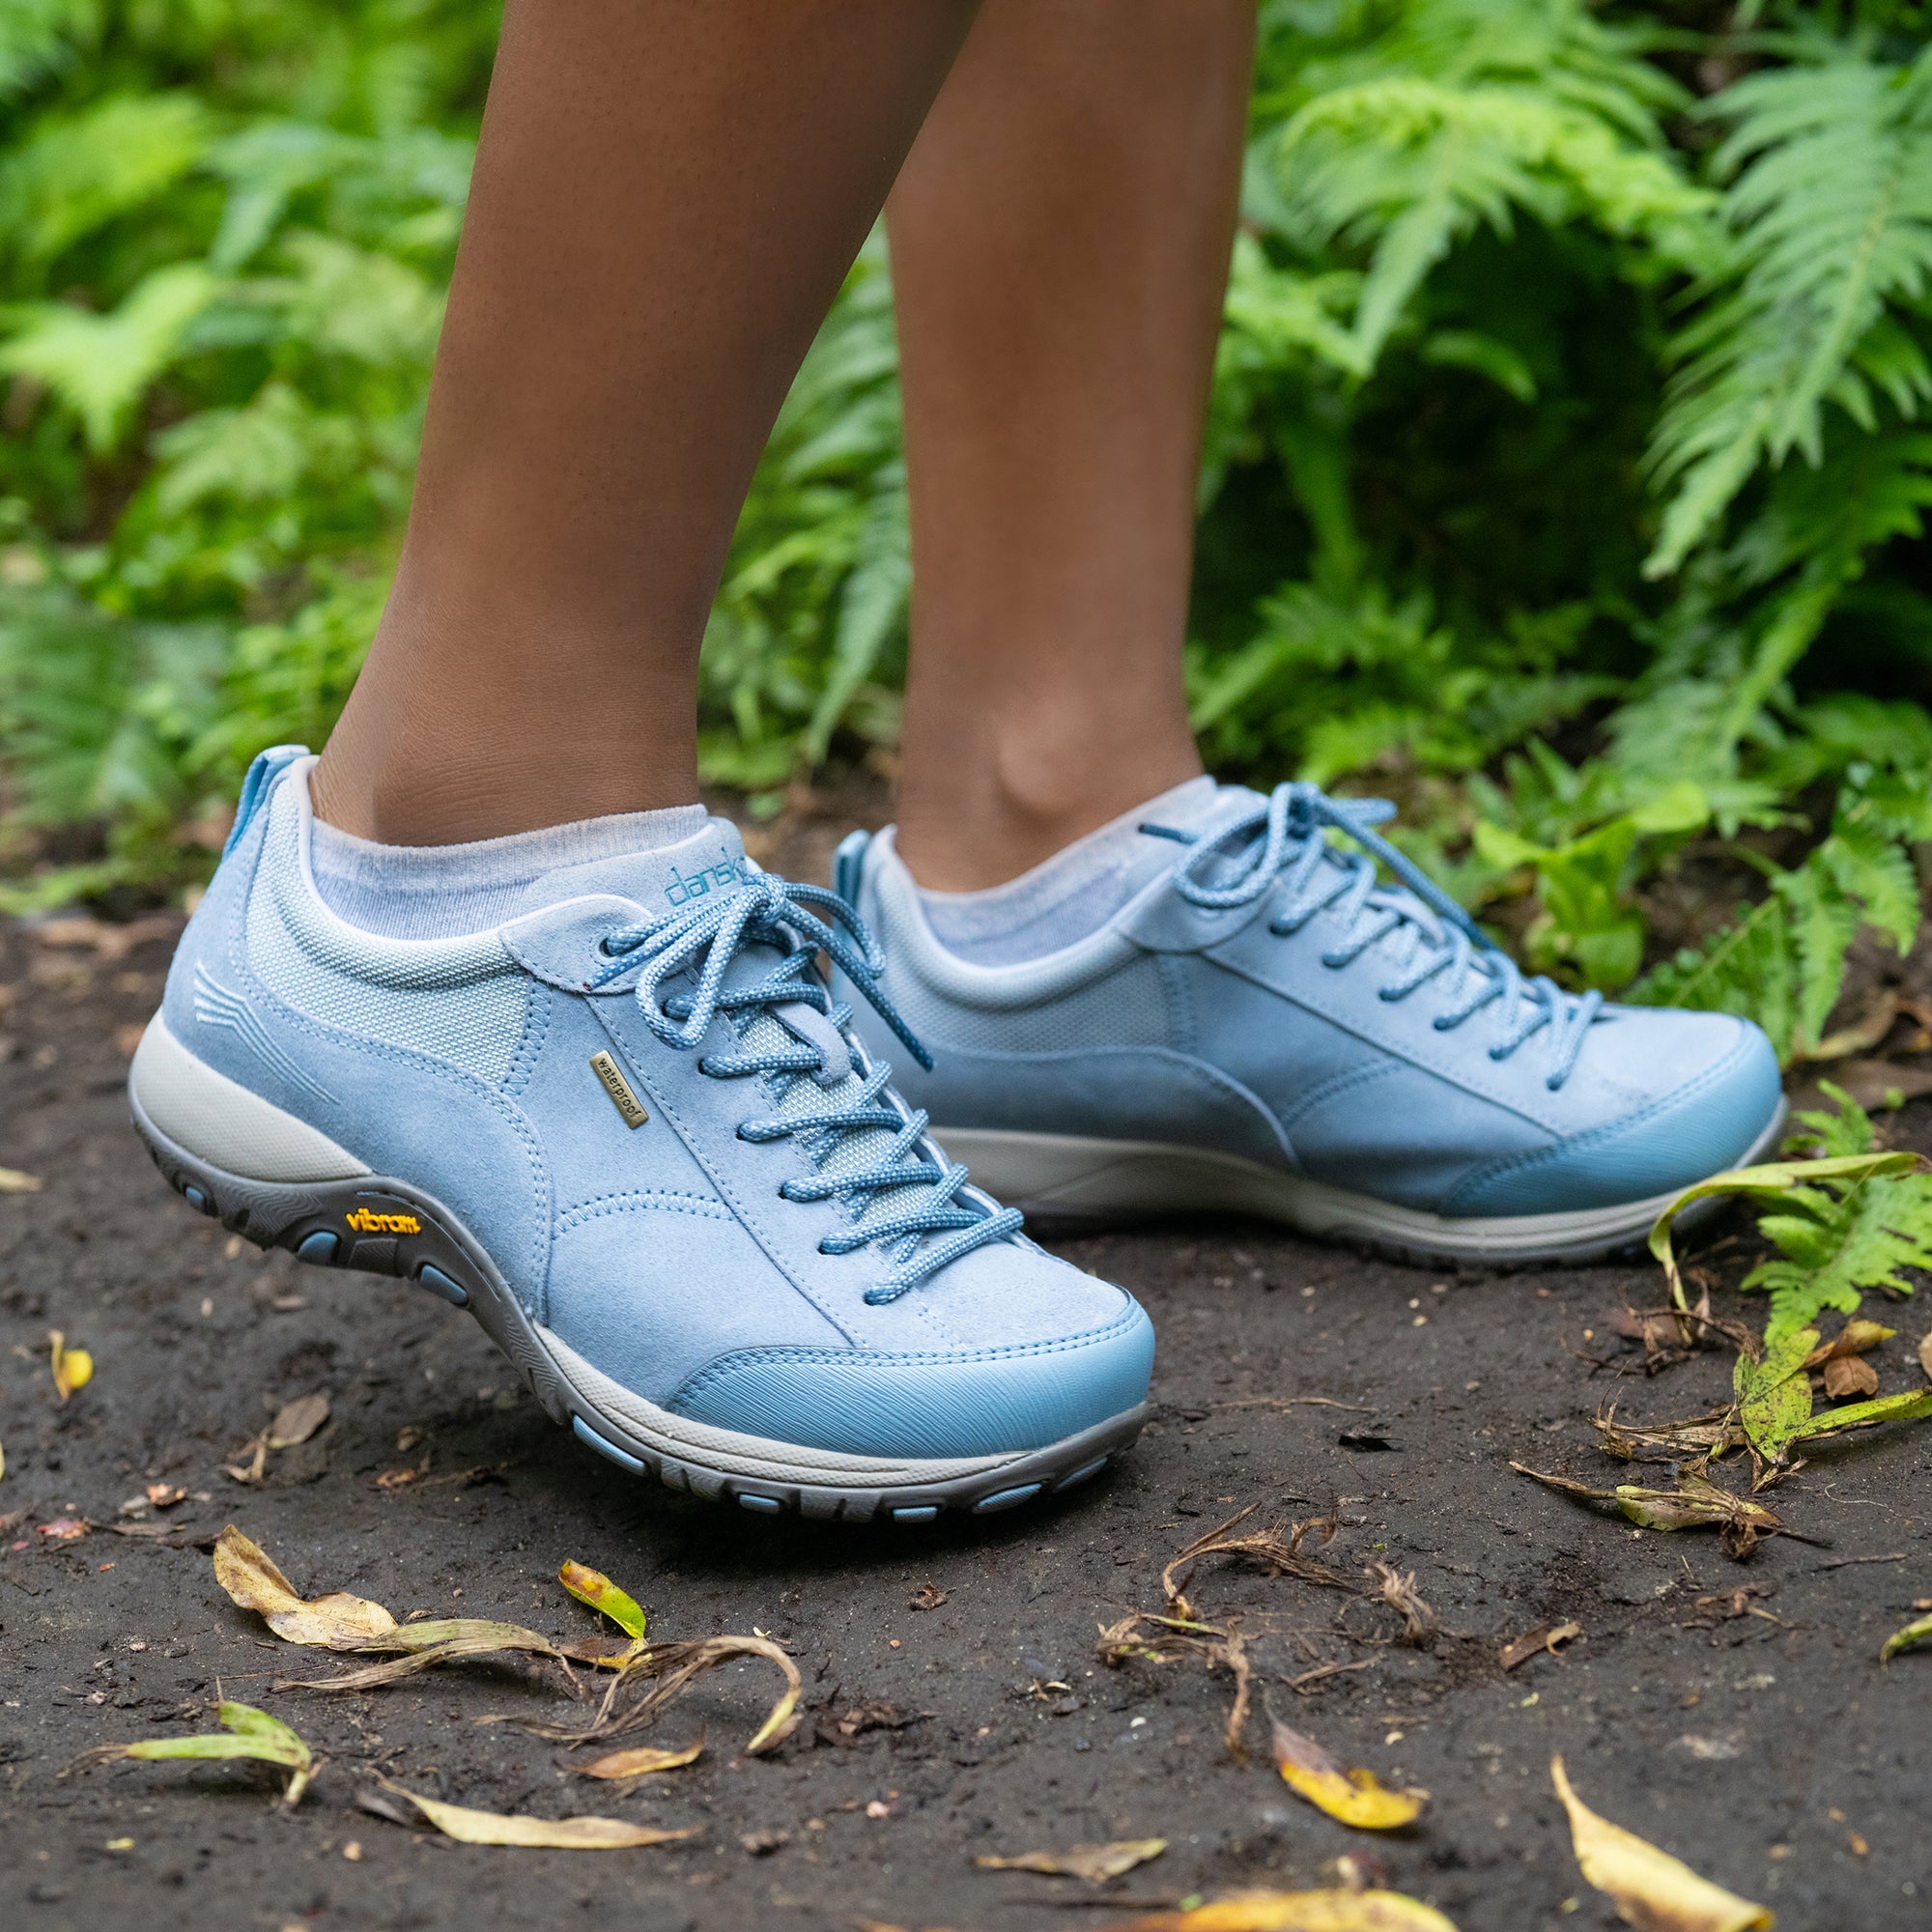 A close up of sky blue outdoor sneakers with a Vibram rubber outsole and durable leather uppers.